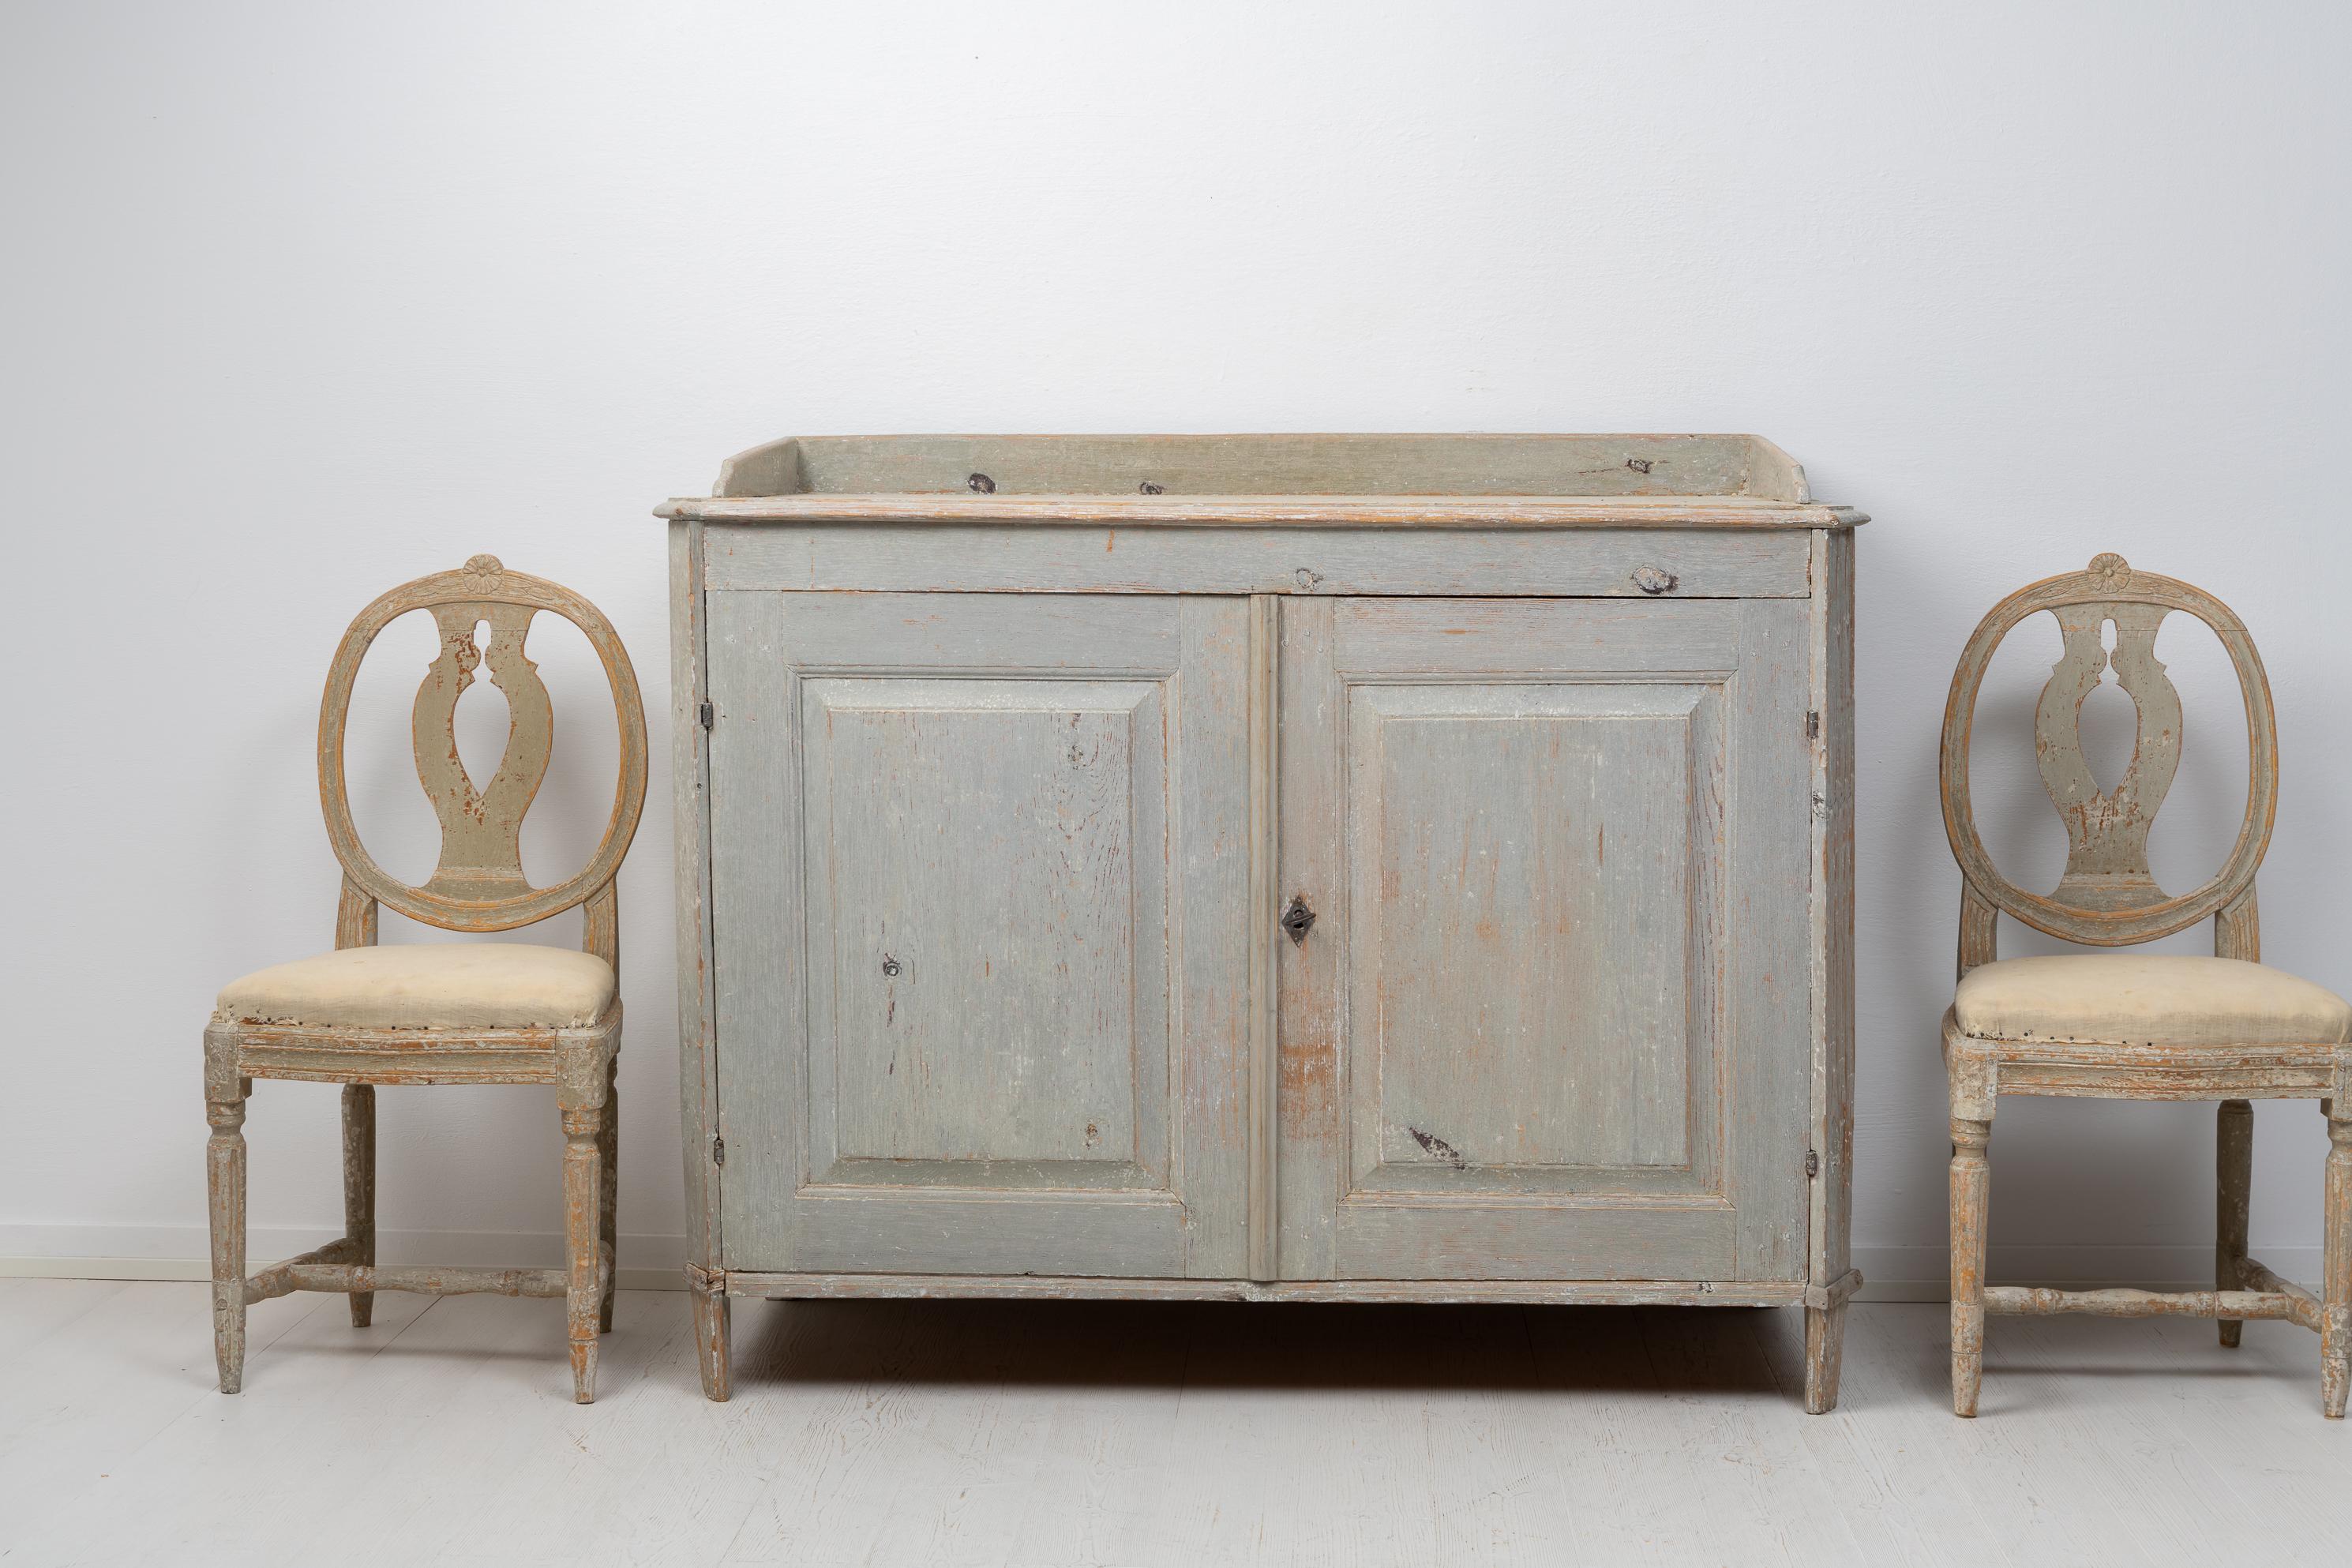 Rare antique gustavian sideboard from Northern Sweden made around 1780. The sideboard is made in painted pine and dry scraped by hand down to the original first layer of paint from the late 1700s. It has two doors and an interior with shelves. The